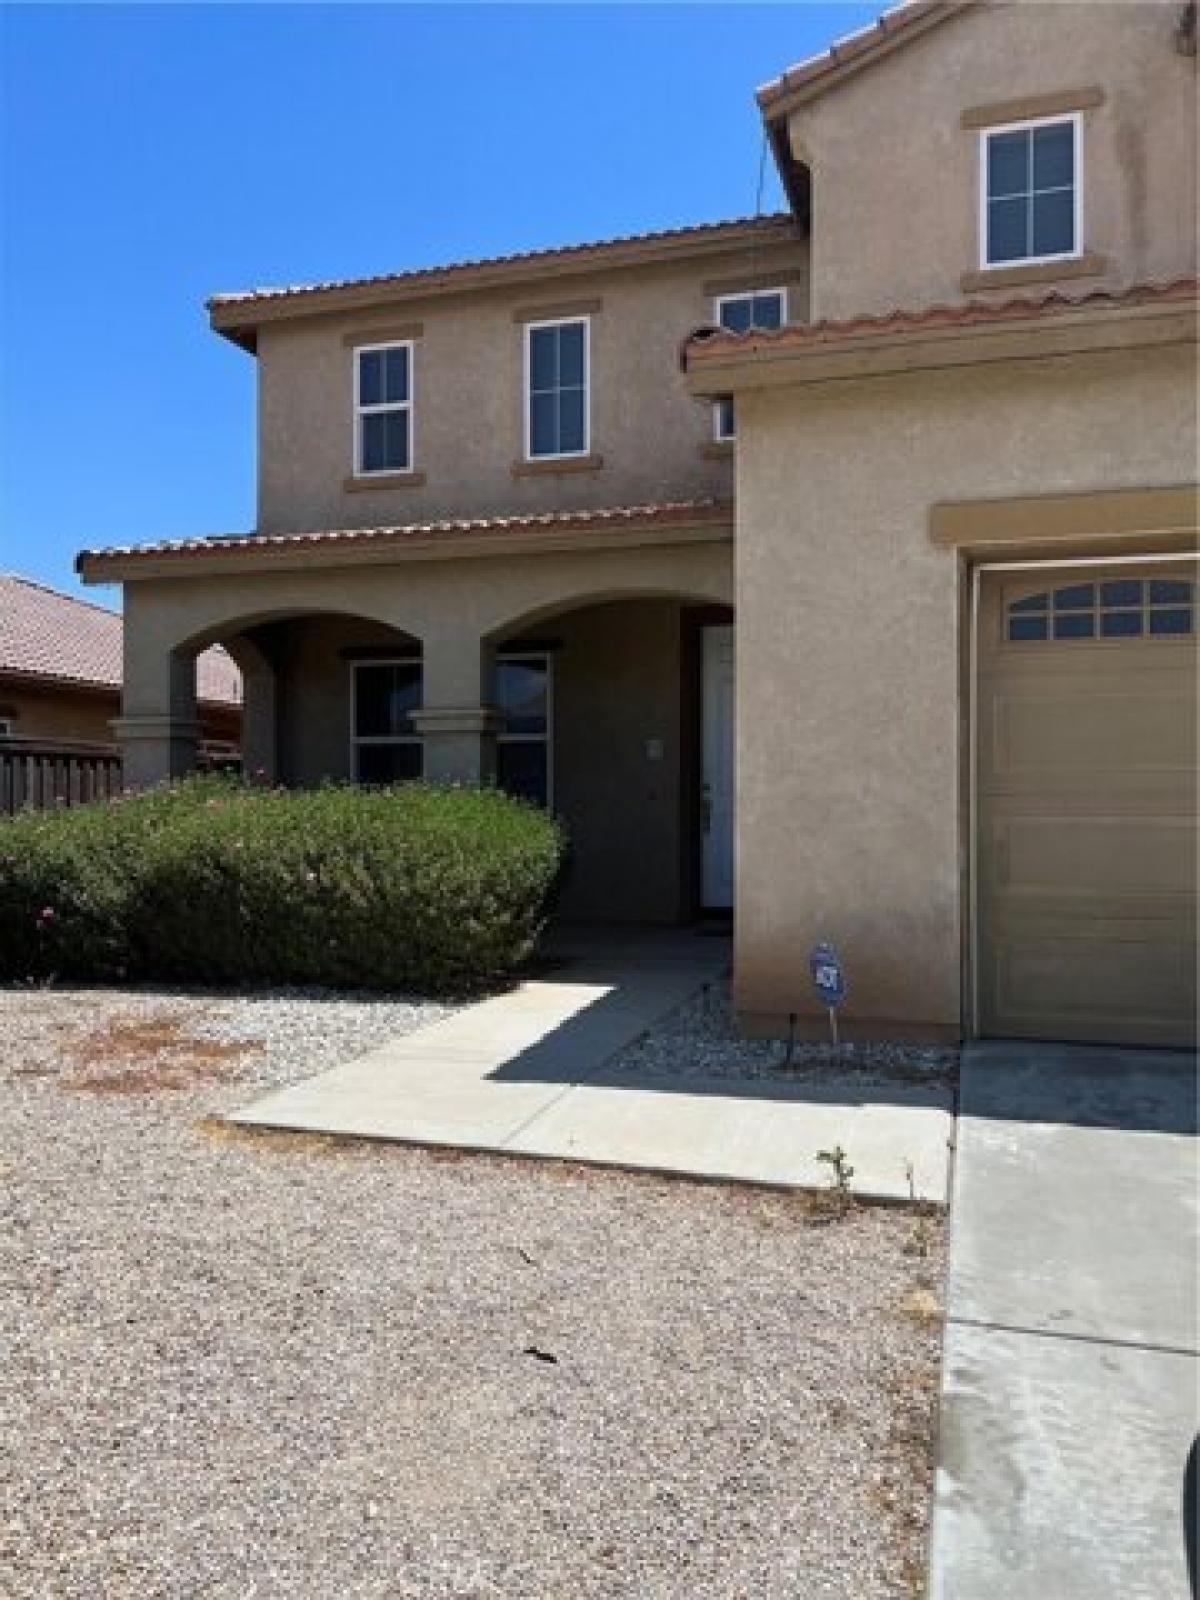 Picture of Home For Rent in Hesperia, California, United States